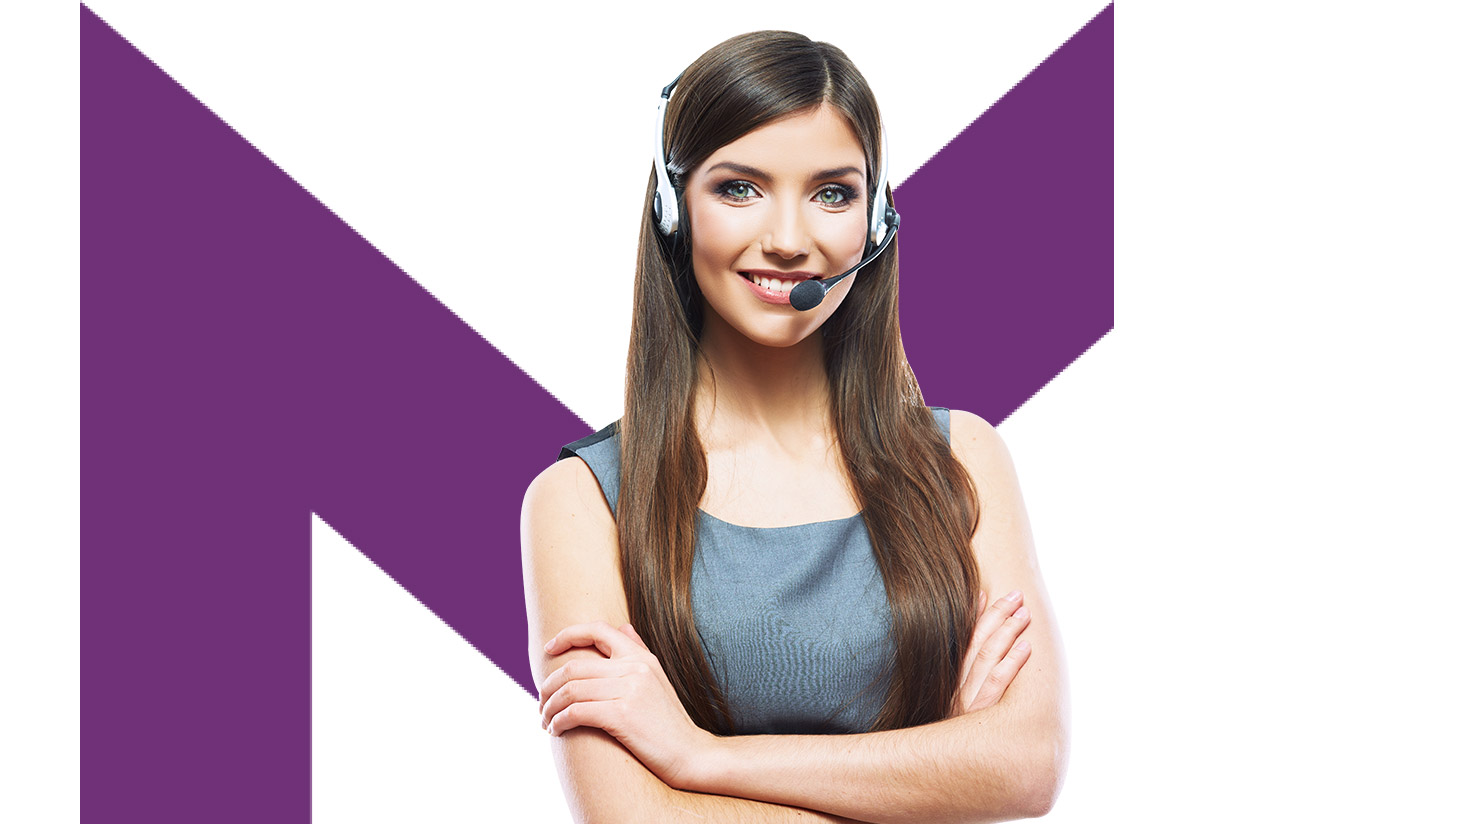 woman wearing a headset smiling with arms folded